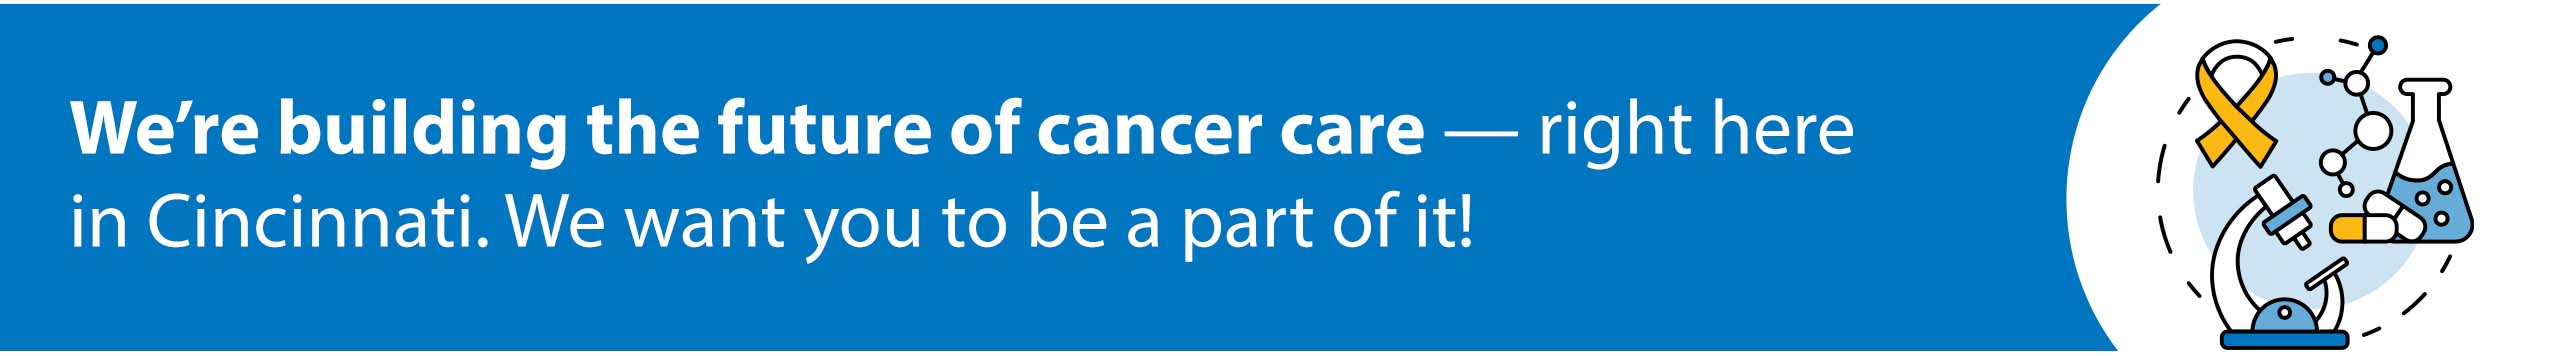 Build the future of cancer care